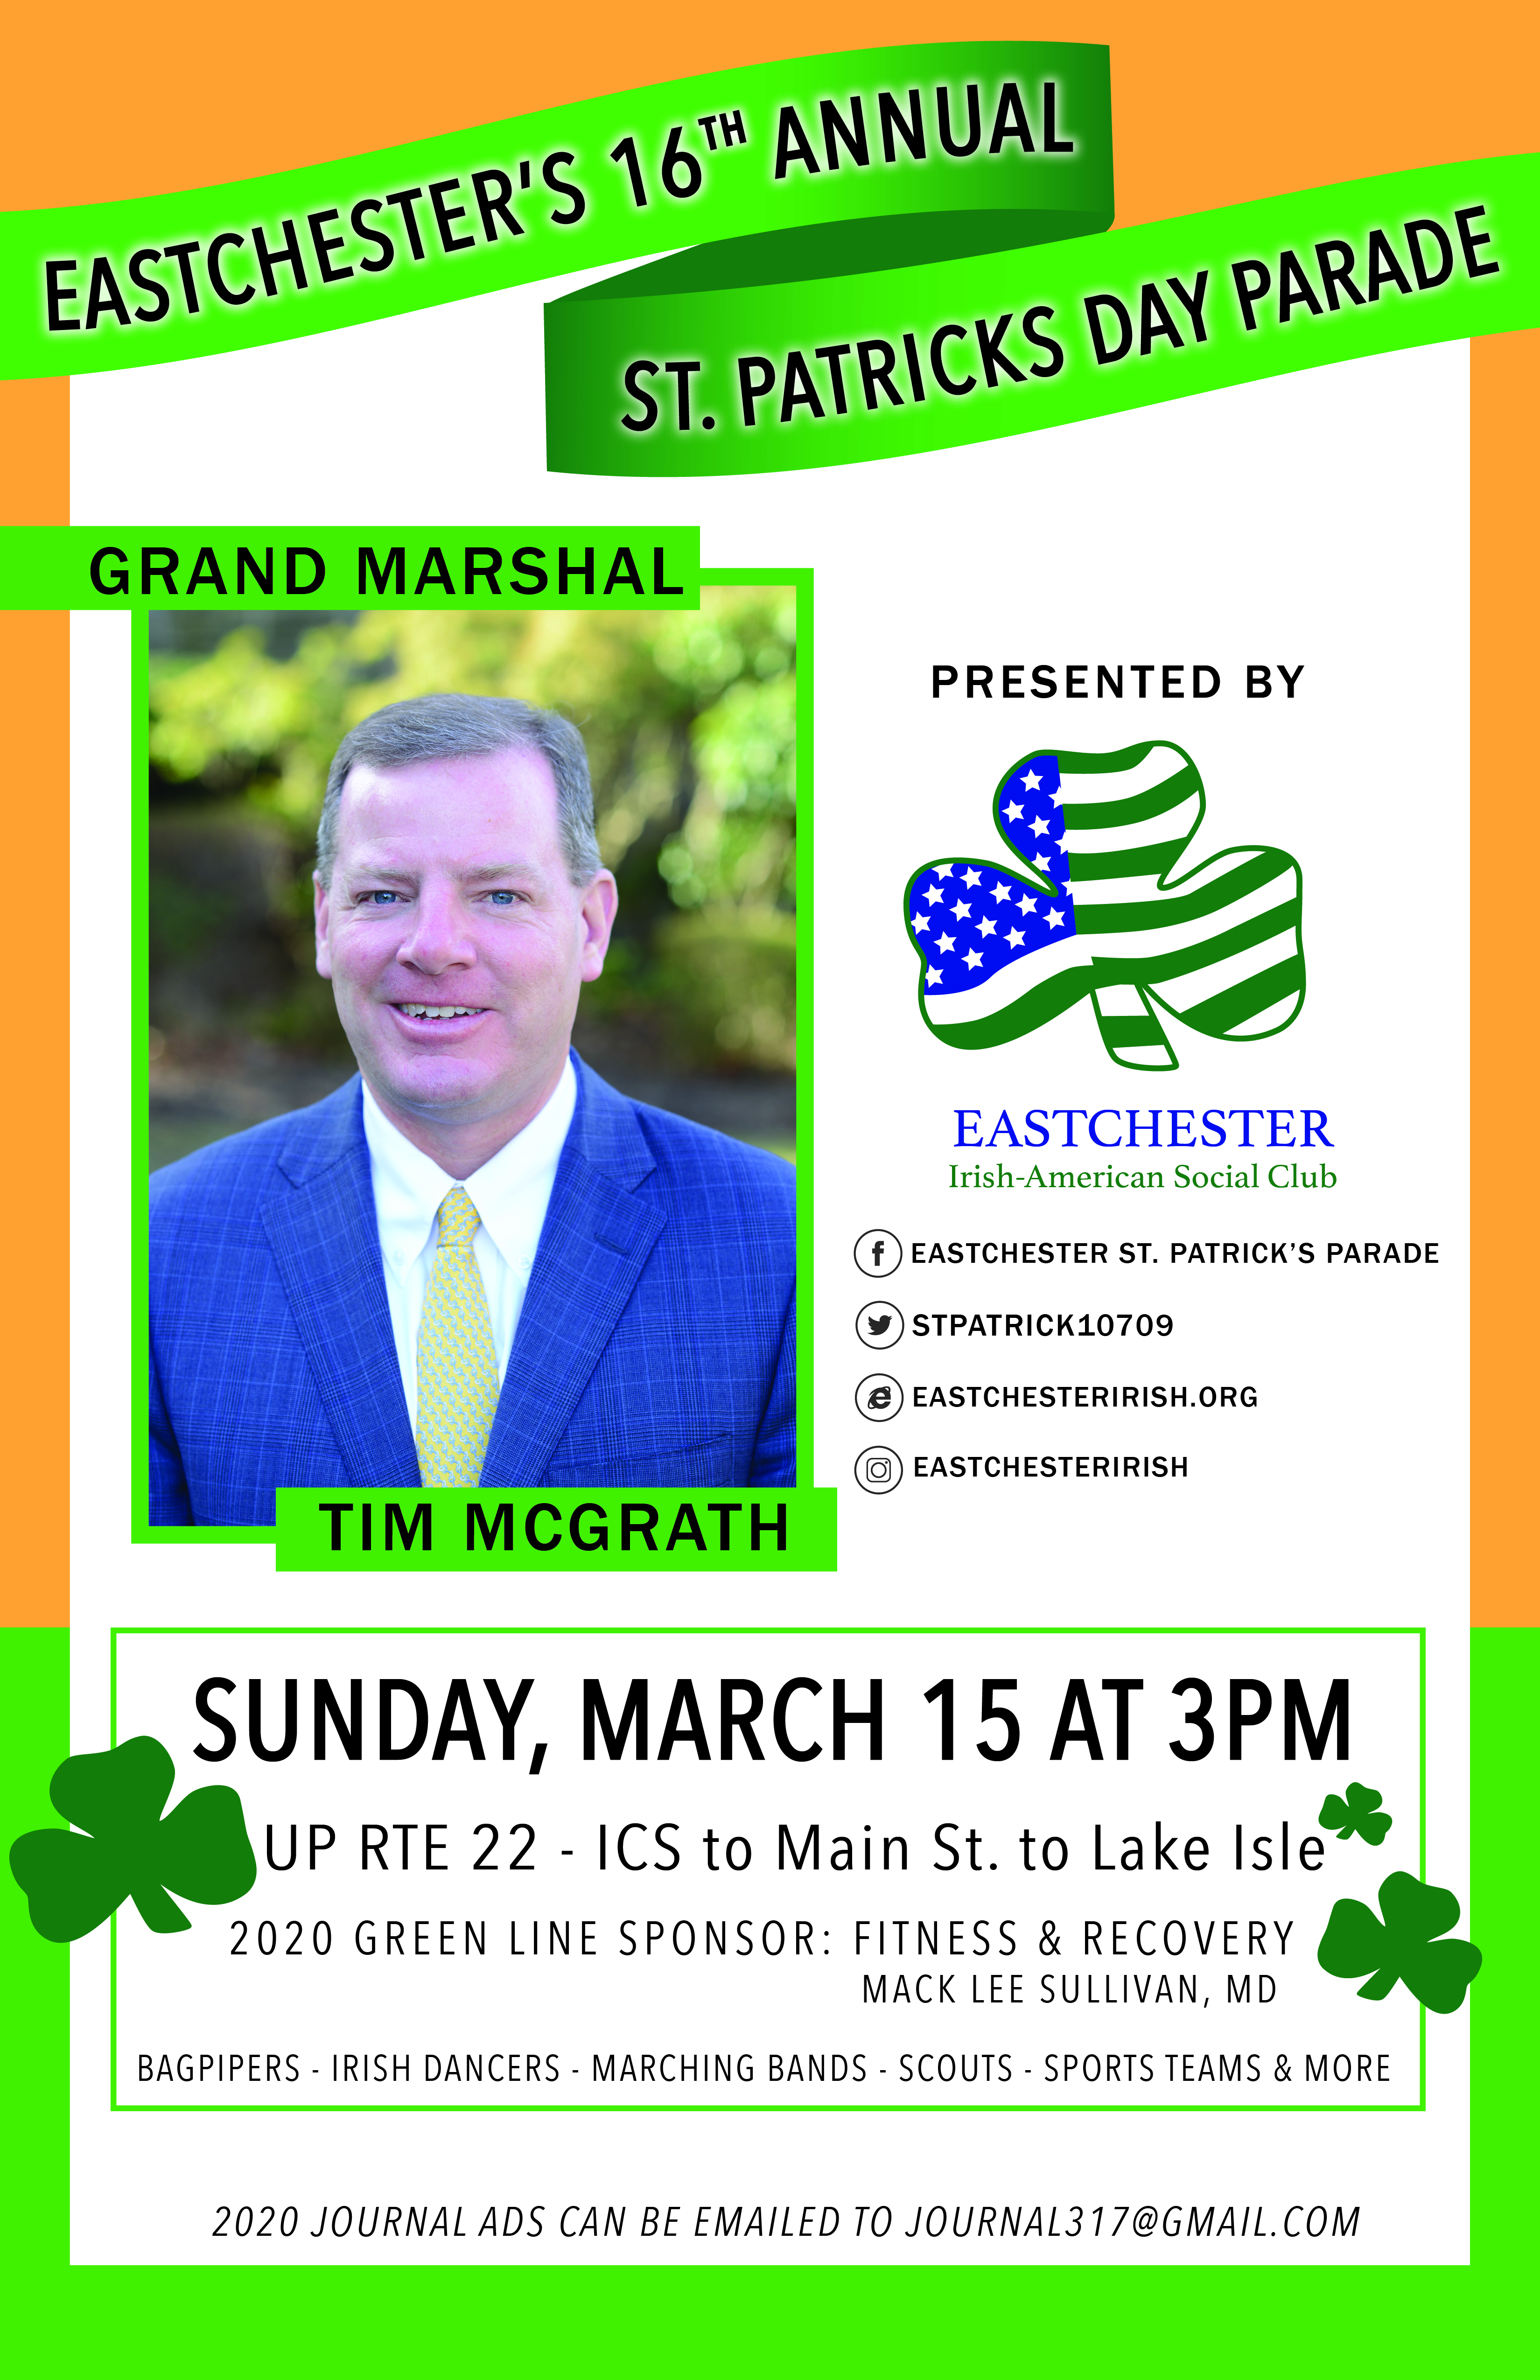 St. Patrick's Day Parade poster 2020